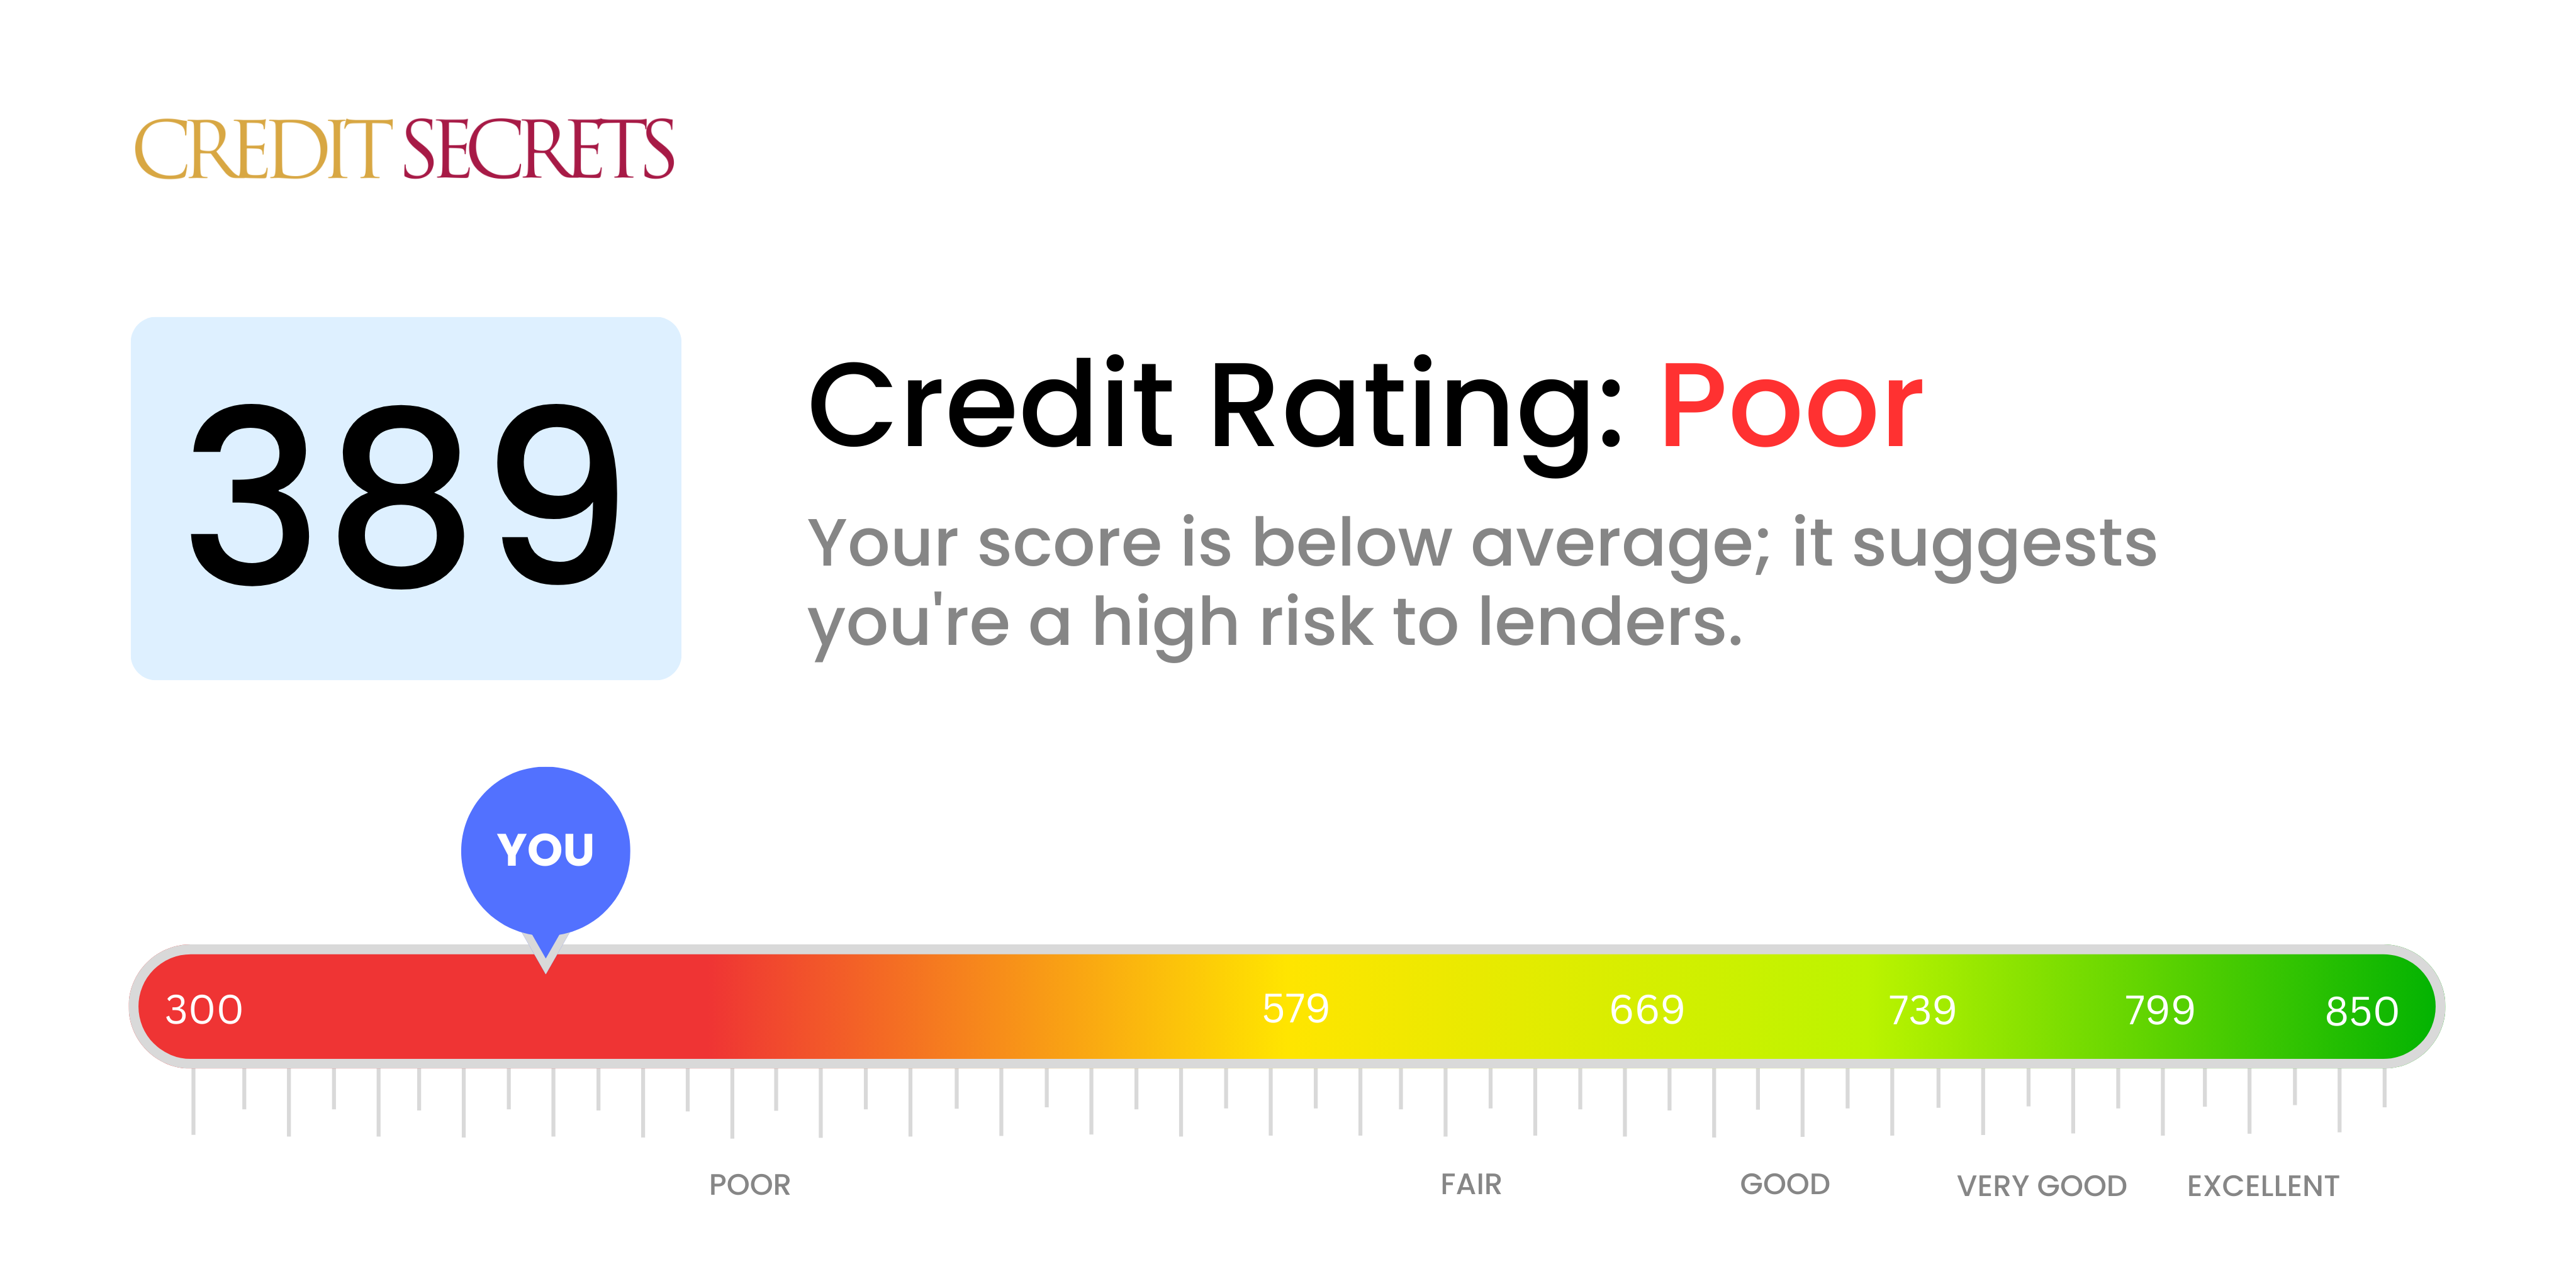 Is 389 a good credit score?